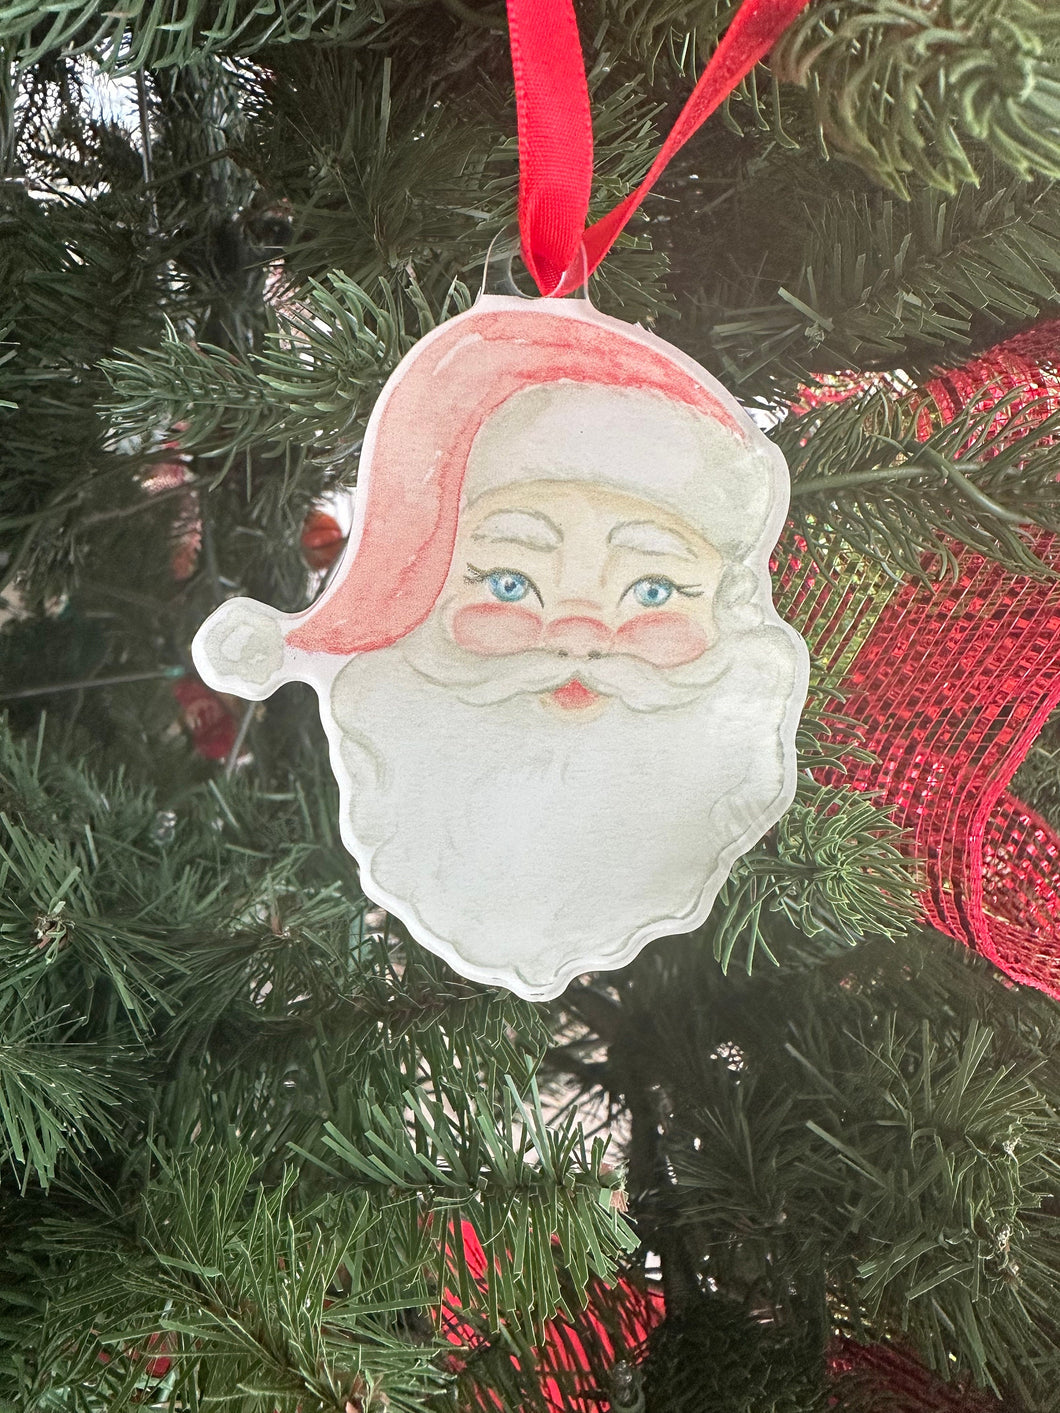 Vintage Santa Acrylic Ornament Christmas Gift Holiday Tree Trimming Hostess Gift Gift For Her Gift for Him Housewarming Gift Santa Claus